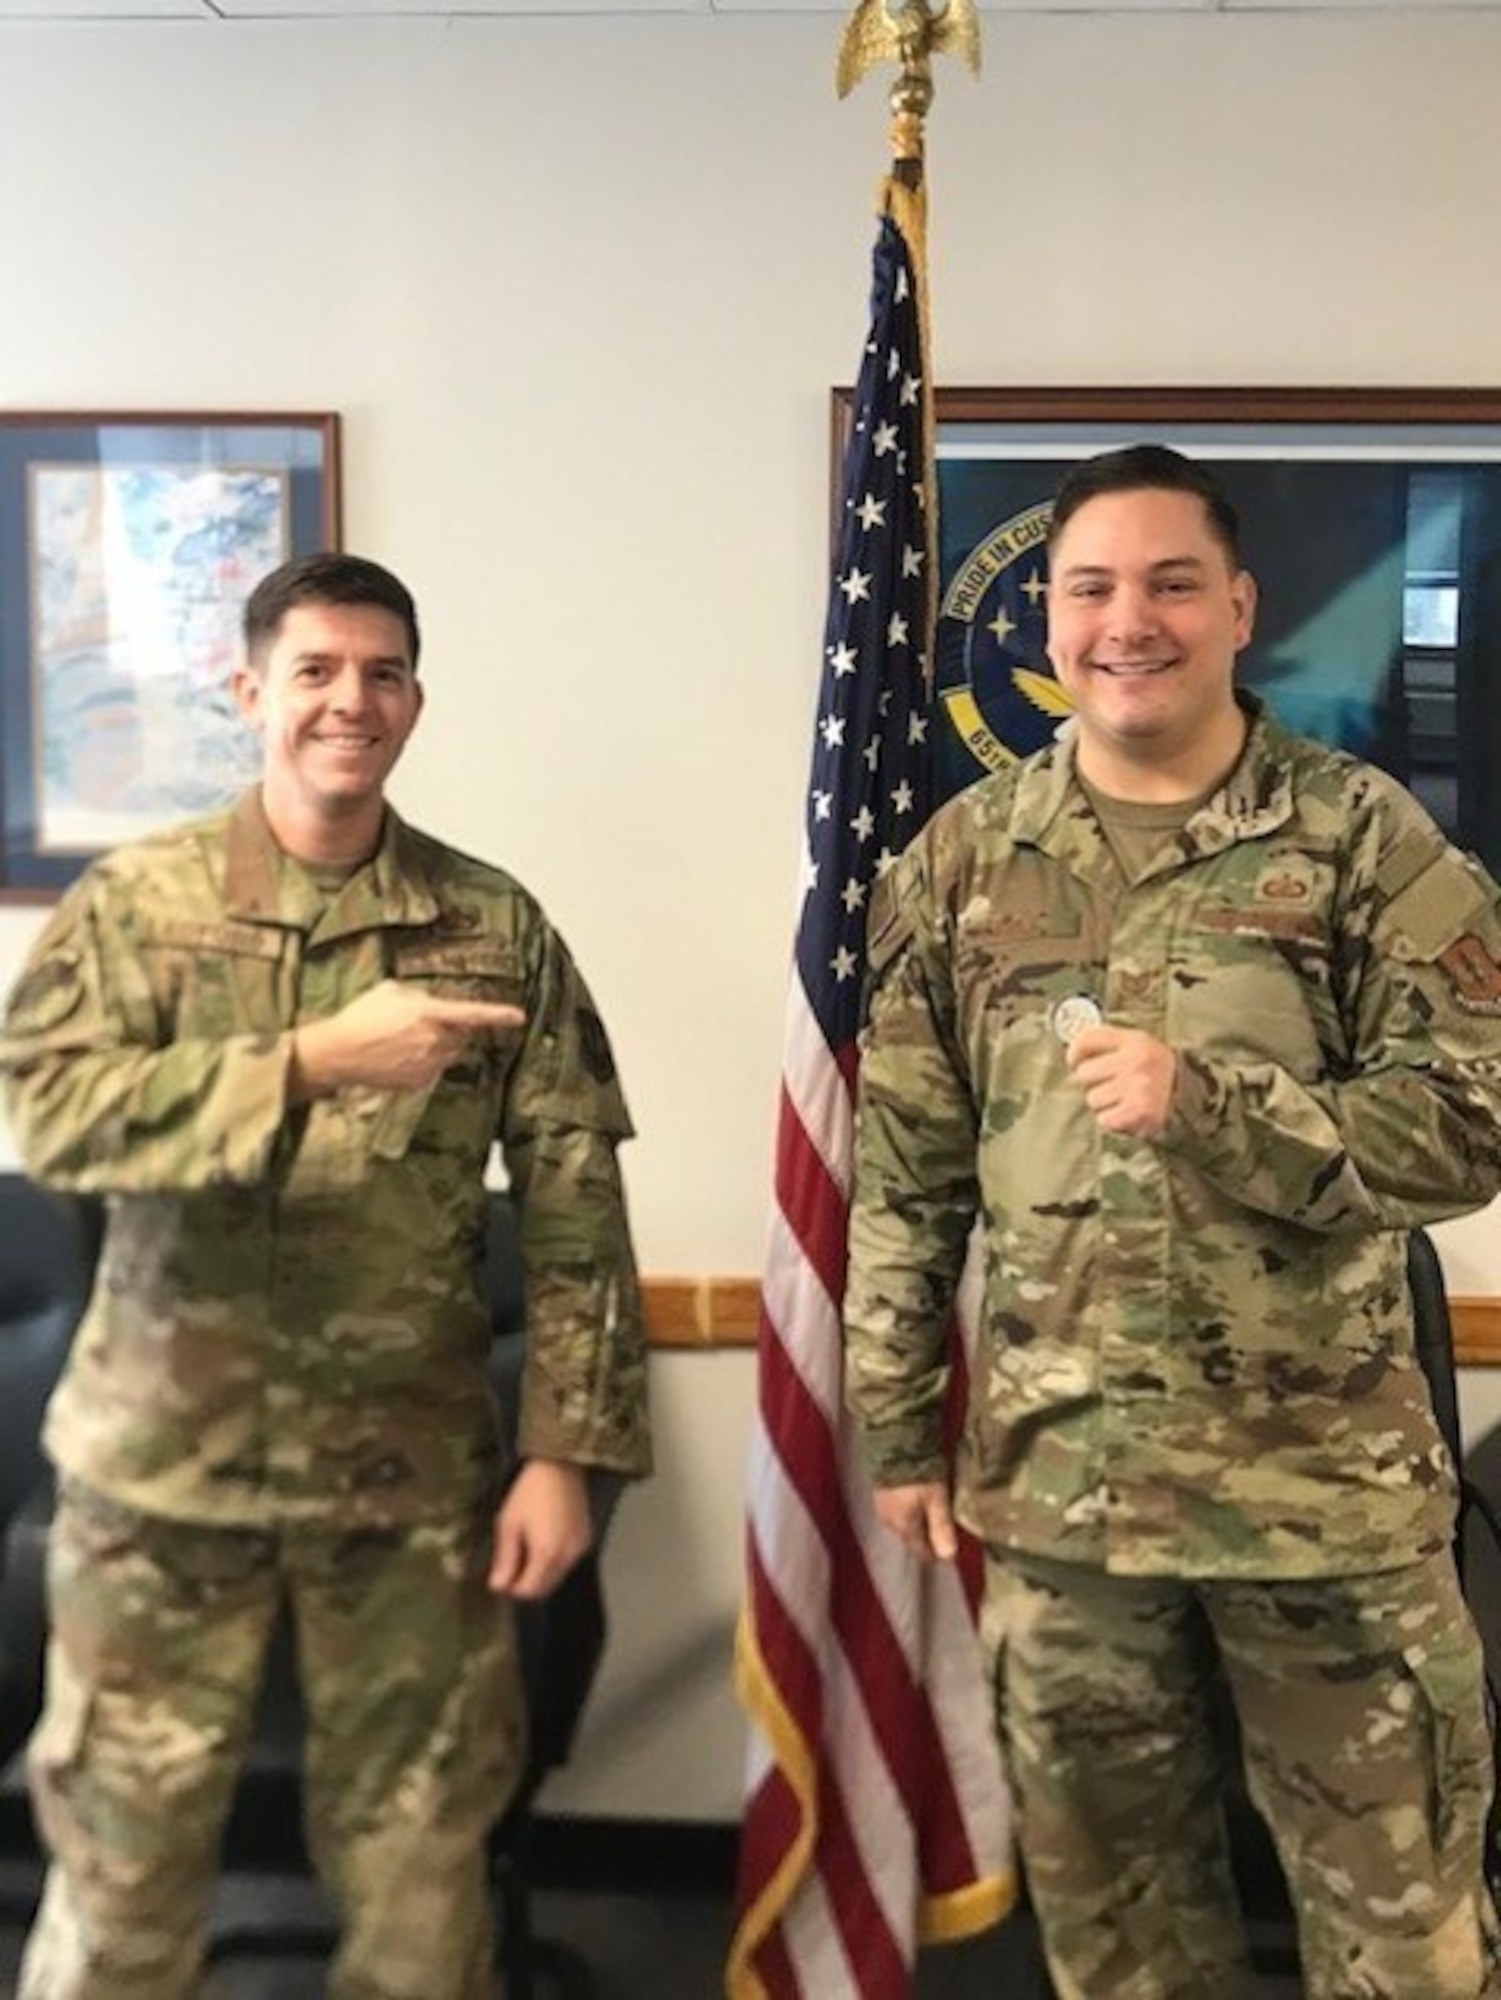 Two military members standing in an office.